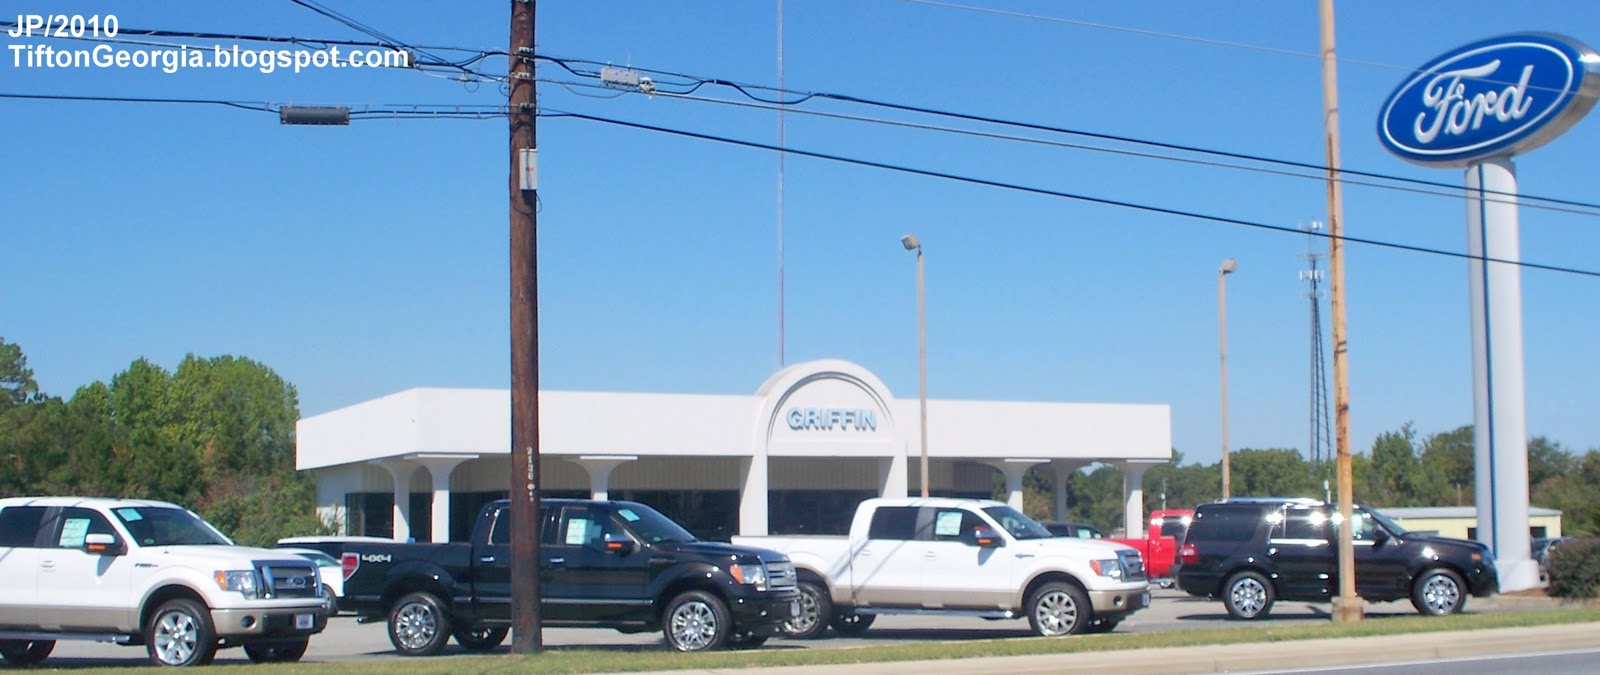 Ford dealership in griffin georgia